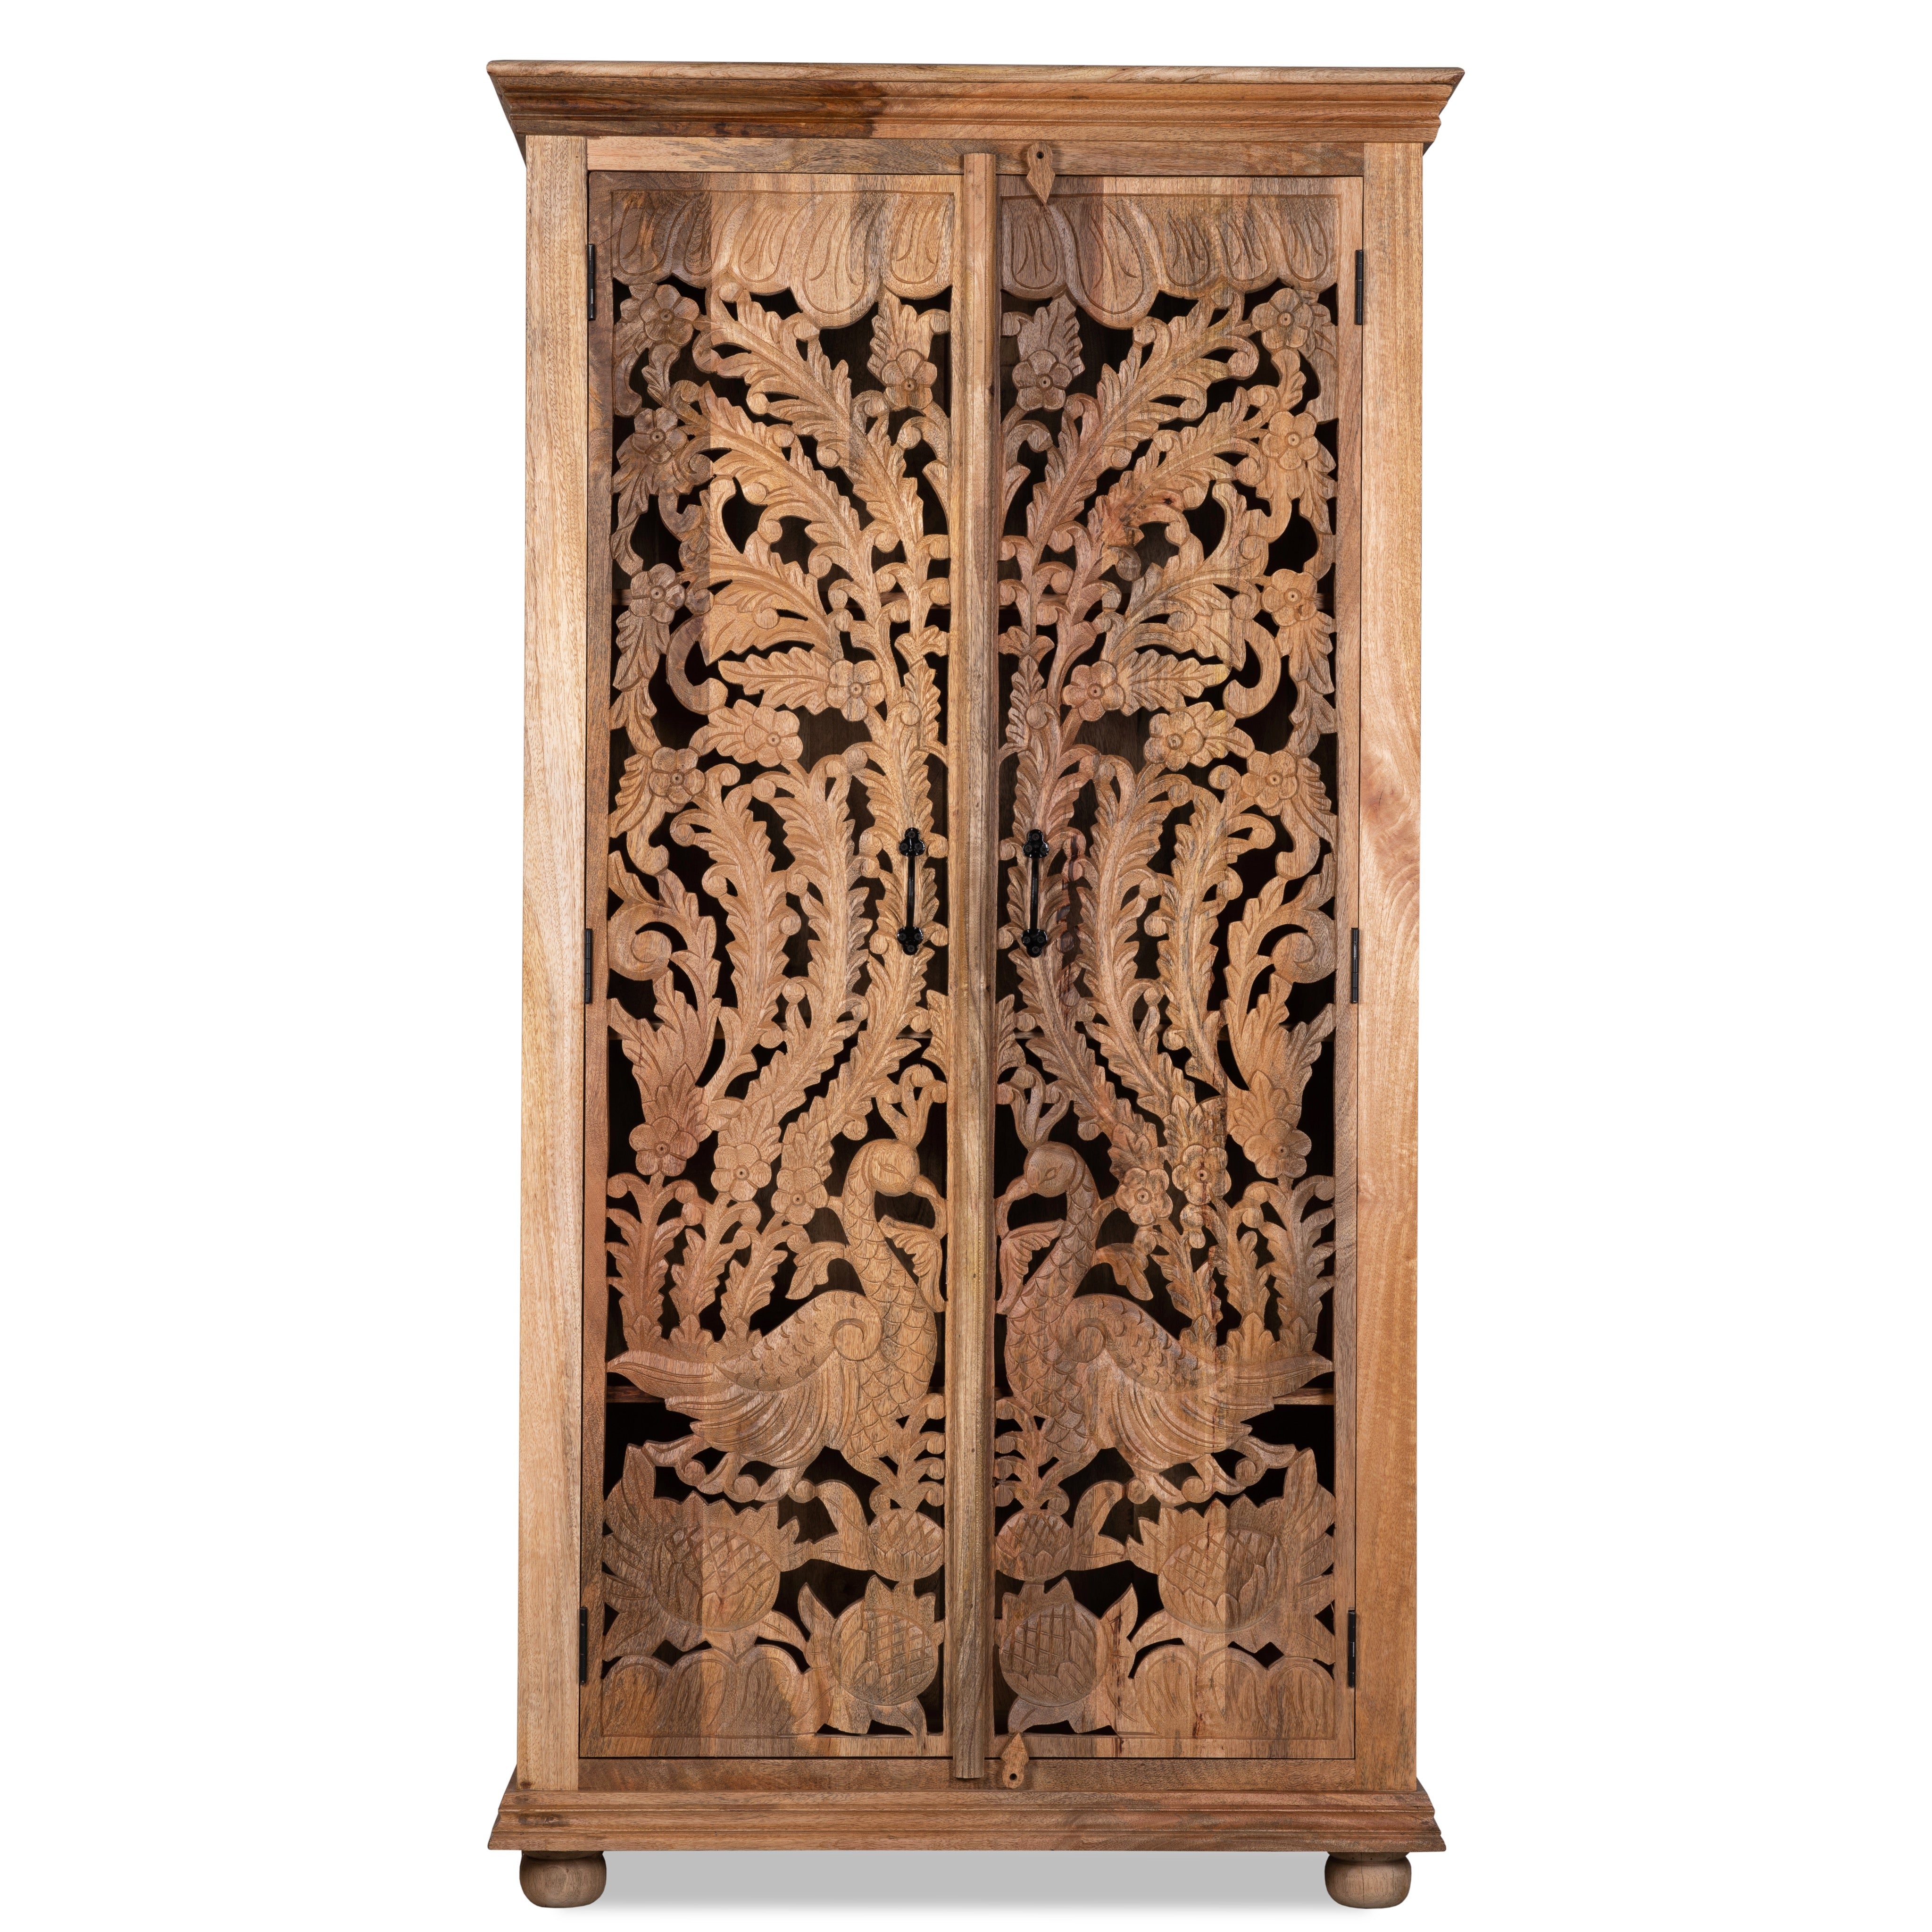 Daman natural, handcrafted wooden cupboard